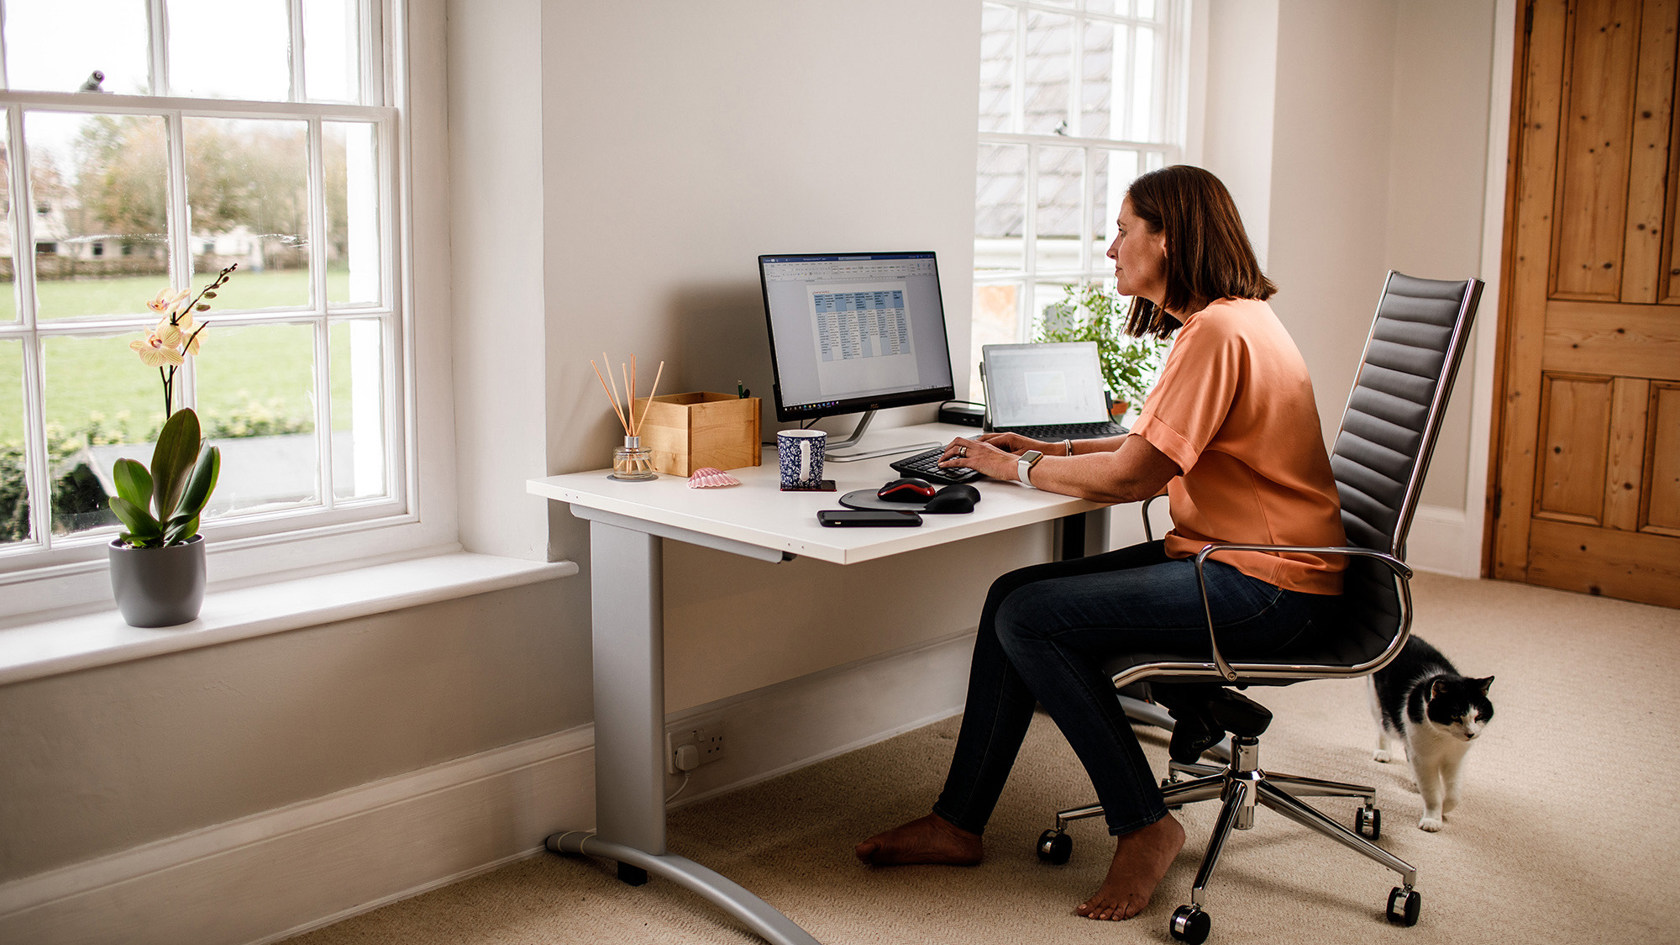 A woman uses a computer in a cosy looking home office.